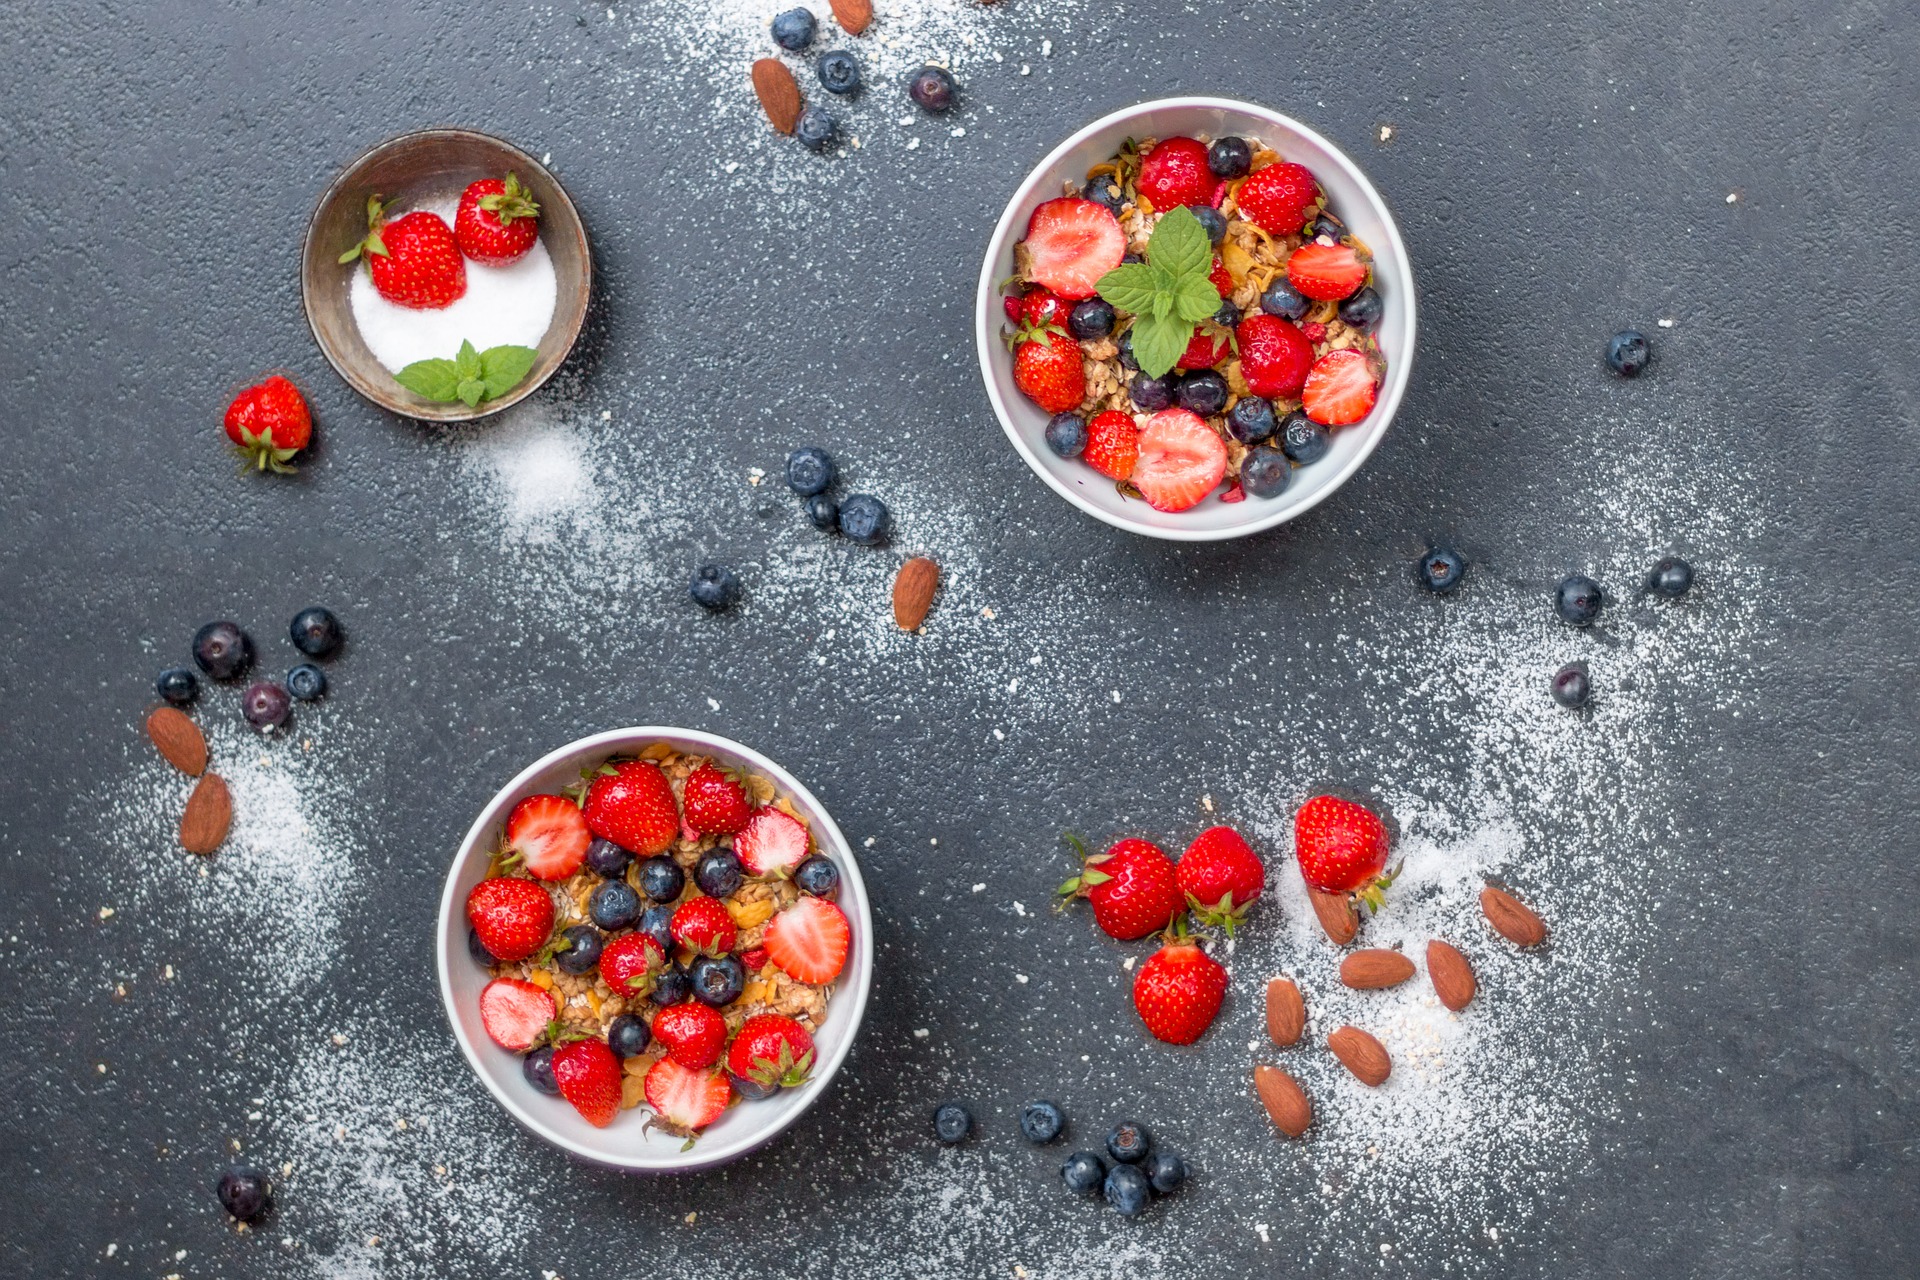 Overhead view of strawberries, raspberries, blueberries, and almonds in small bowls on blue table